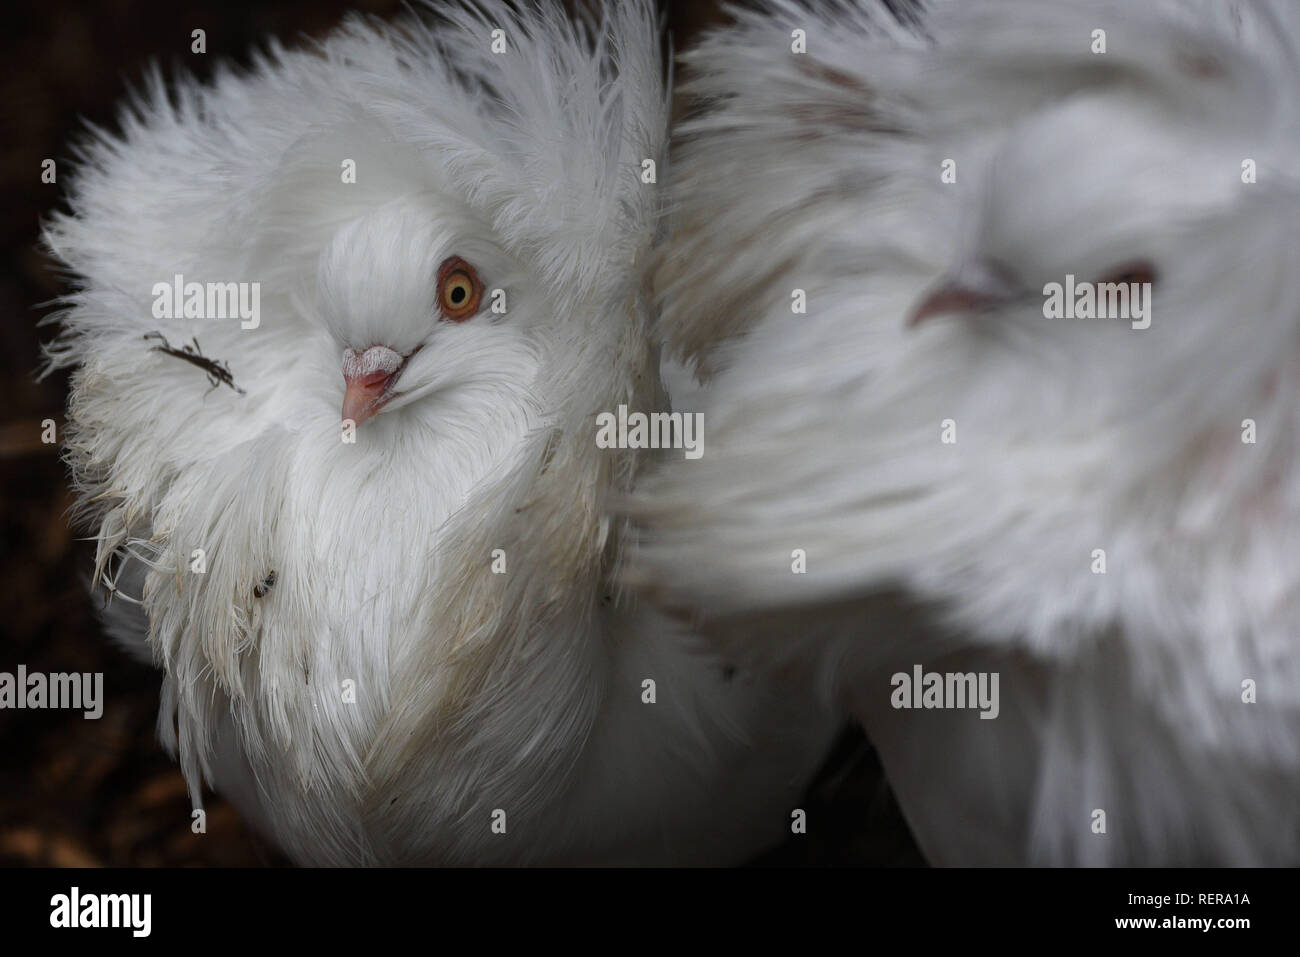 Madrid, Madrid, Spain. 22nd Jan, 2019. Jacobin pigeons seen with their feathered hood agitated by wind at Madrid zoo, where the gusts of wind reached 30 kilometers an hour during the afternoon hours. According to the AEMET state meteorology service, has issued yellow and orange alerts for wind, rain, snow and strong waves in several provinces during the next days. Credit: John Milner/SOPA Images/ZUMA Wire/Alamy Live News Stock Photo